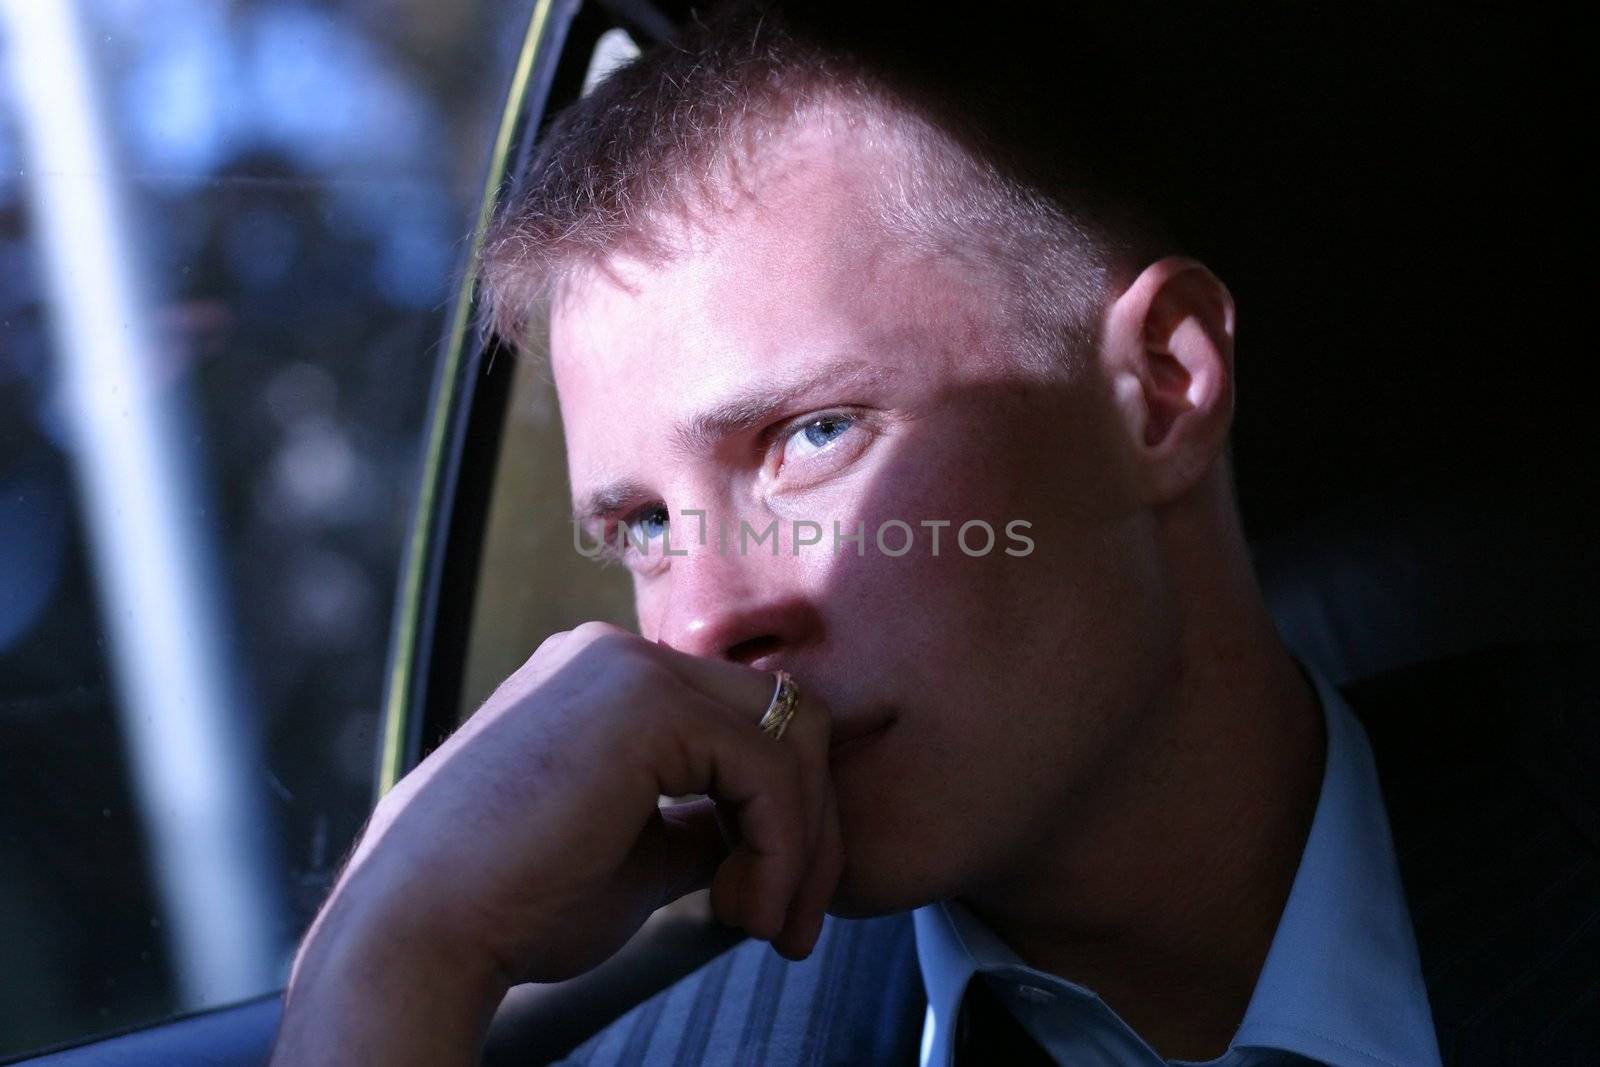 The young man looking to the left in a hand at face covered by the sun